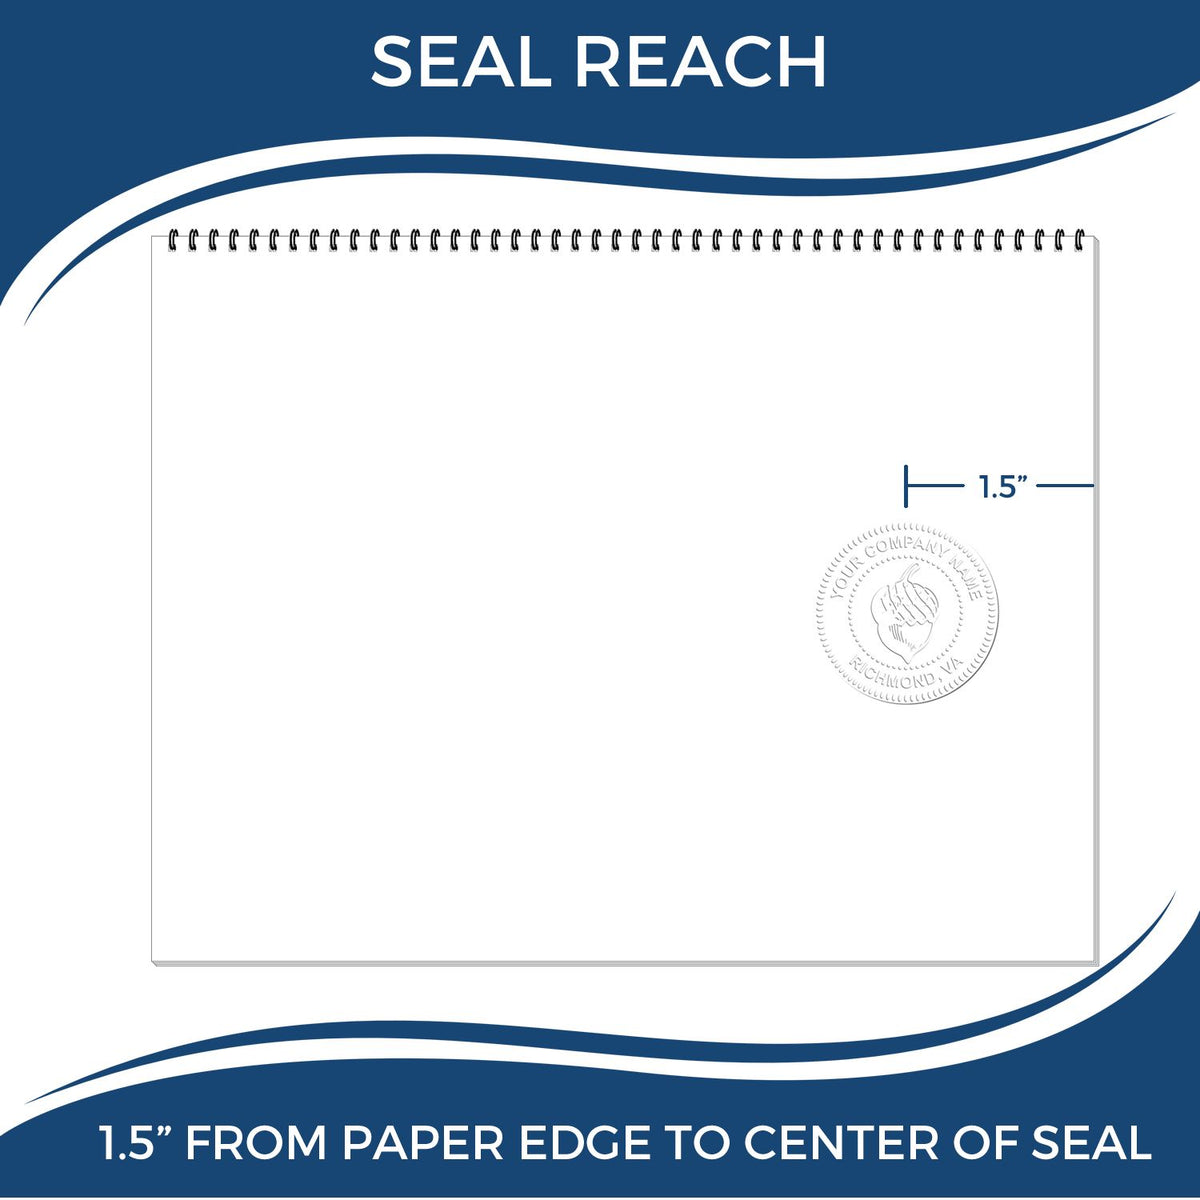 An infographic showing the seal reach which is represented by a ruler and a miniature seal image of the Soft Pocket Iowa Landscape Architect Embosser